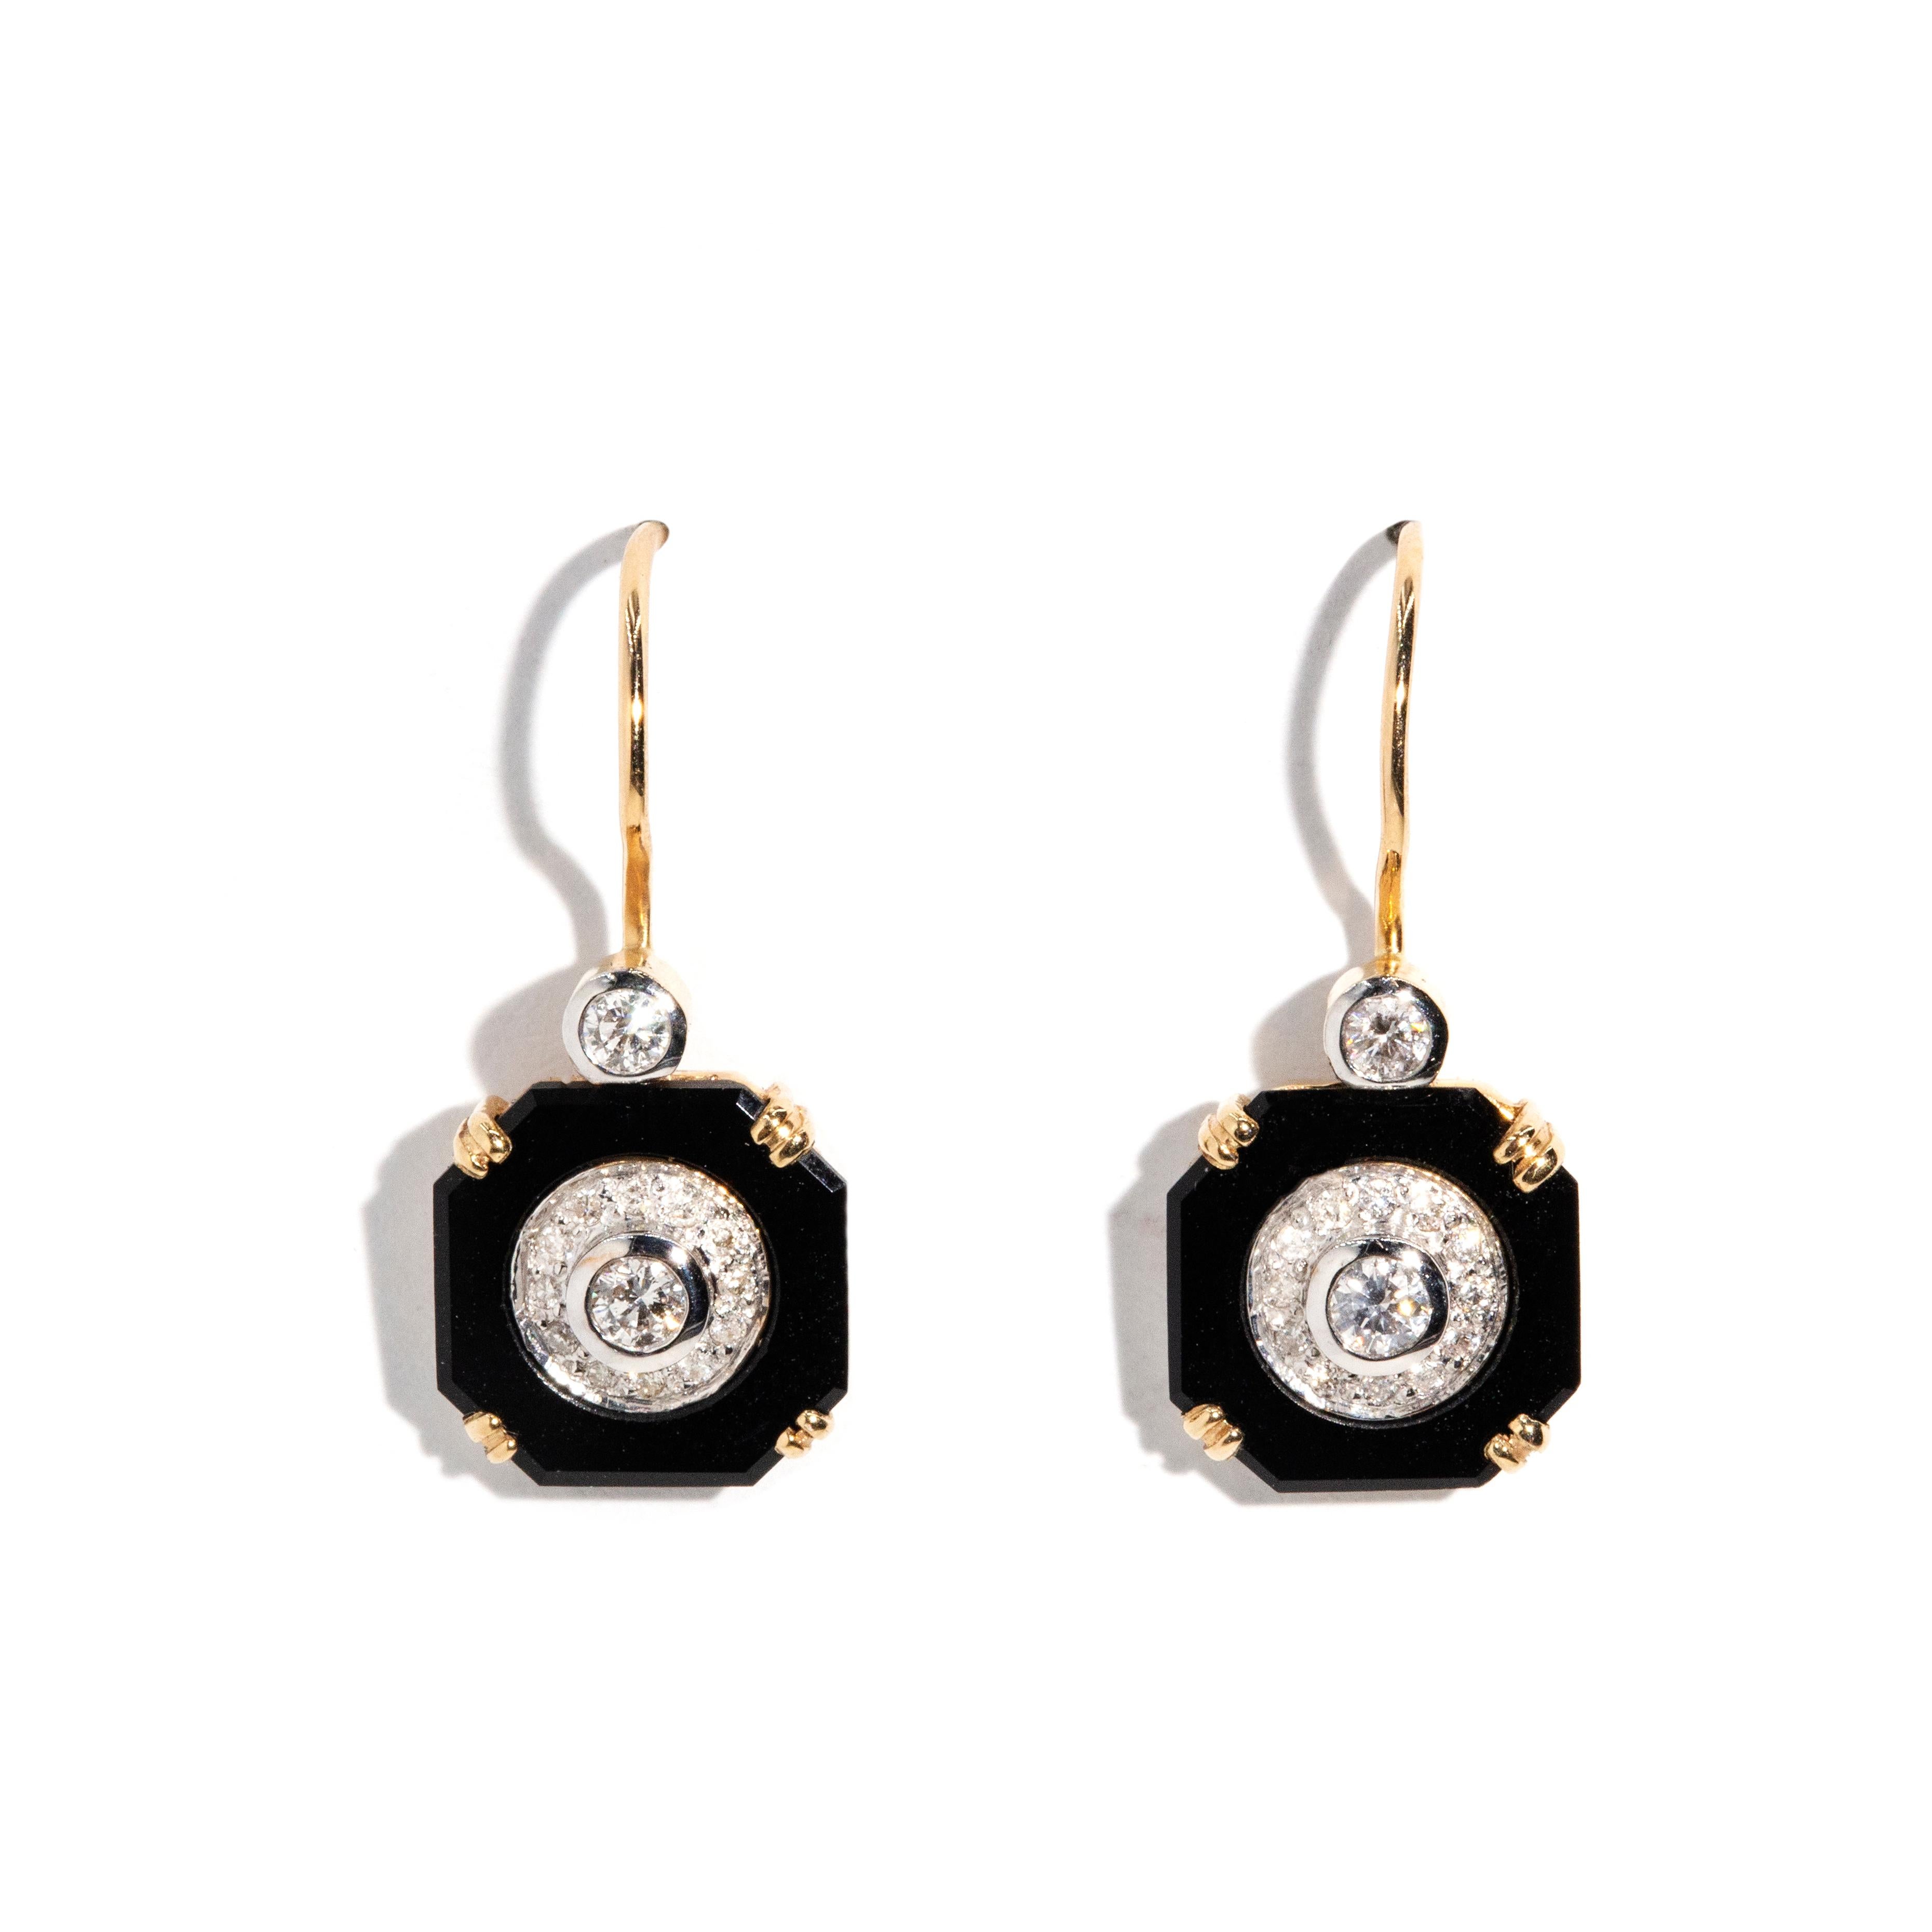 Contemporary Vintage Inspired Black Onyx & Brilliant Diamond Hook Style Earrings 9 Carat Gold